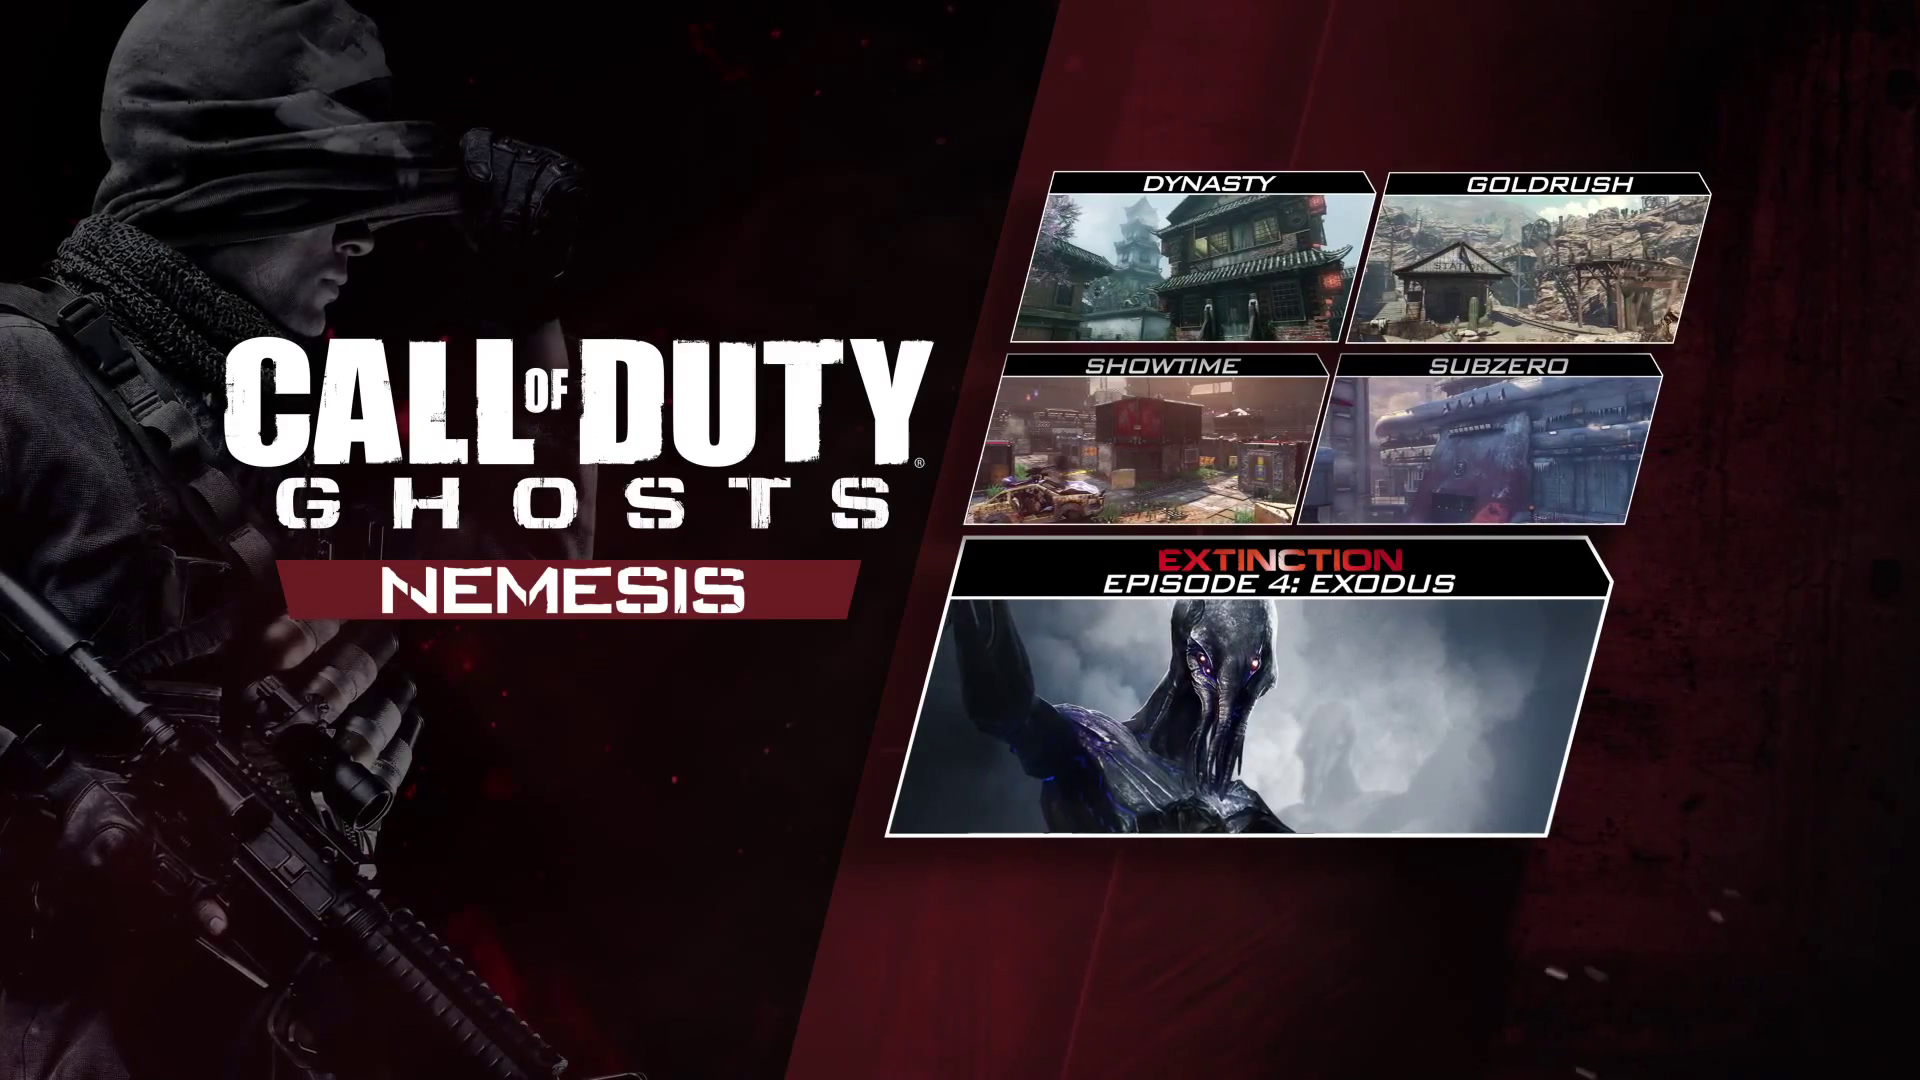 Call-of-Duty-Ghosts-Nemesis 0409